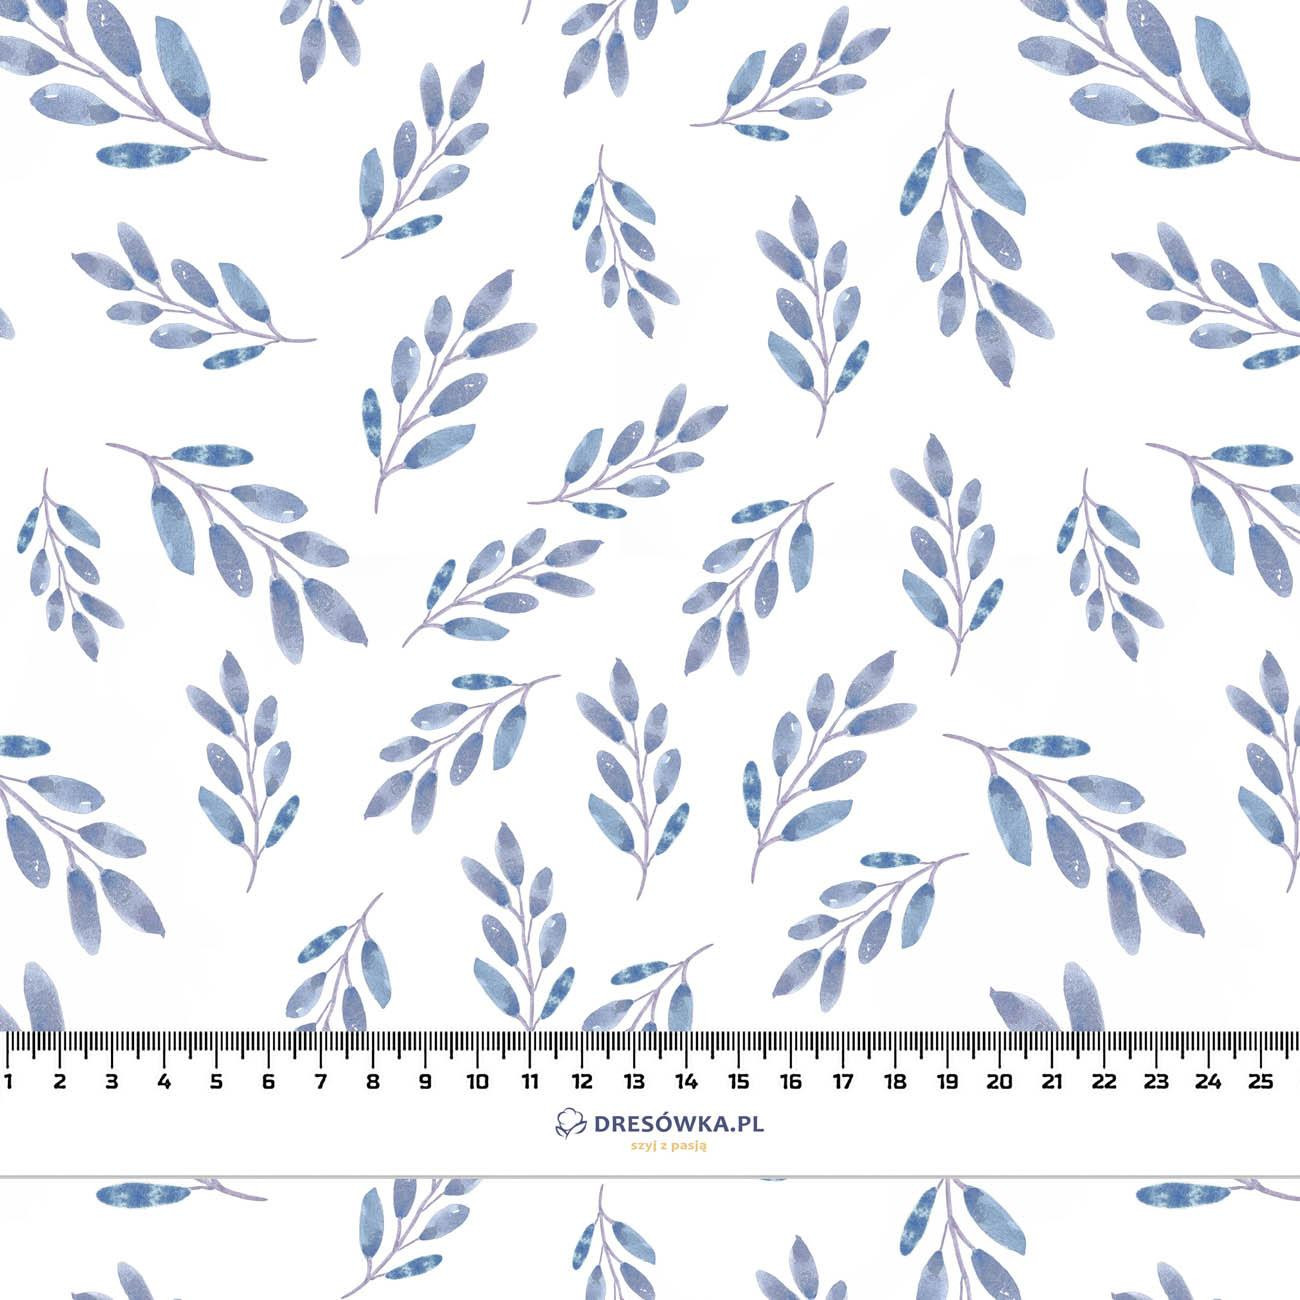 71cm BLUE LEAVES pat. 2 / white - looped knit fabric